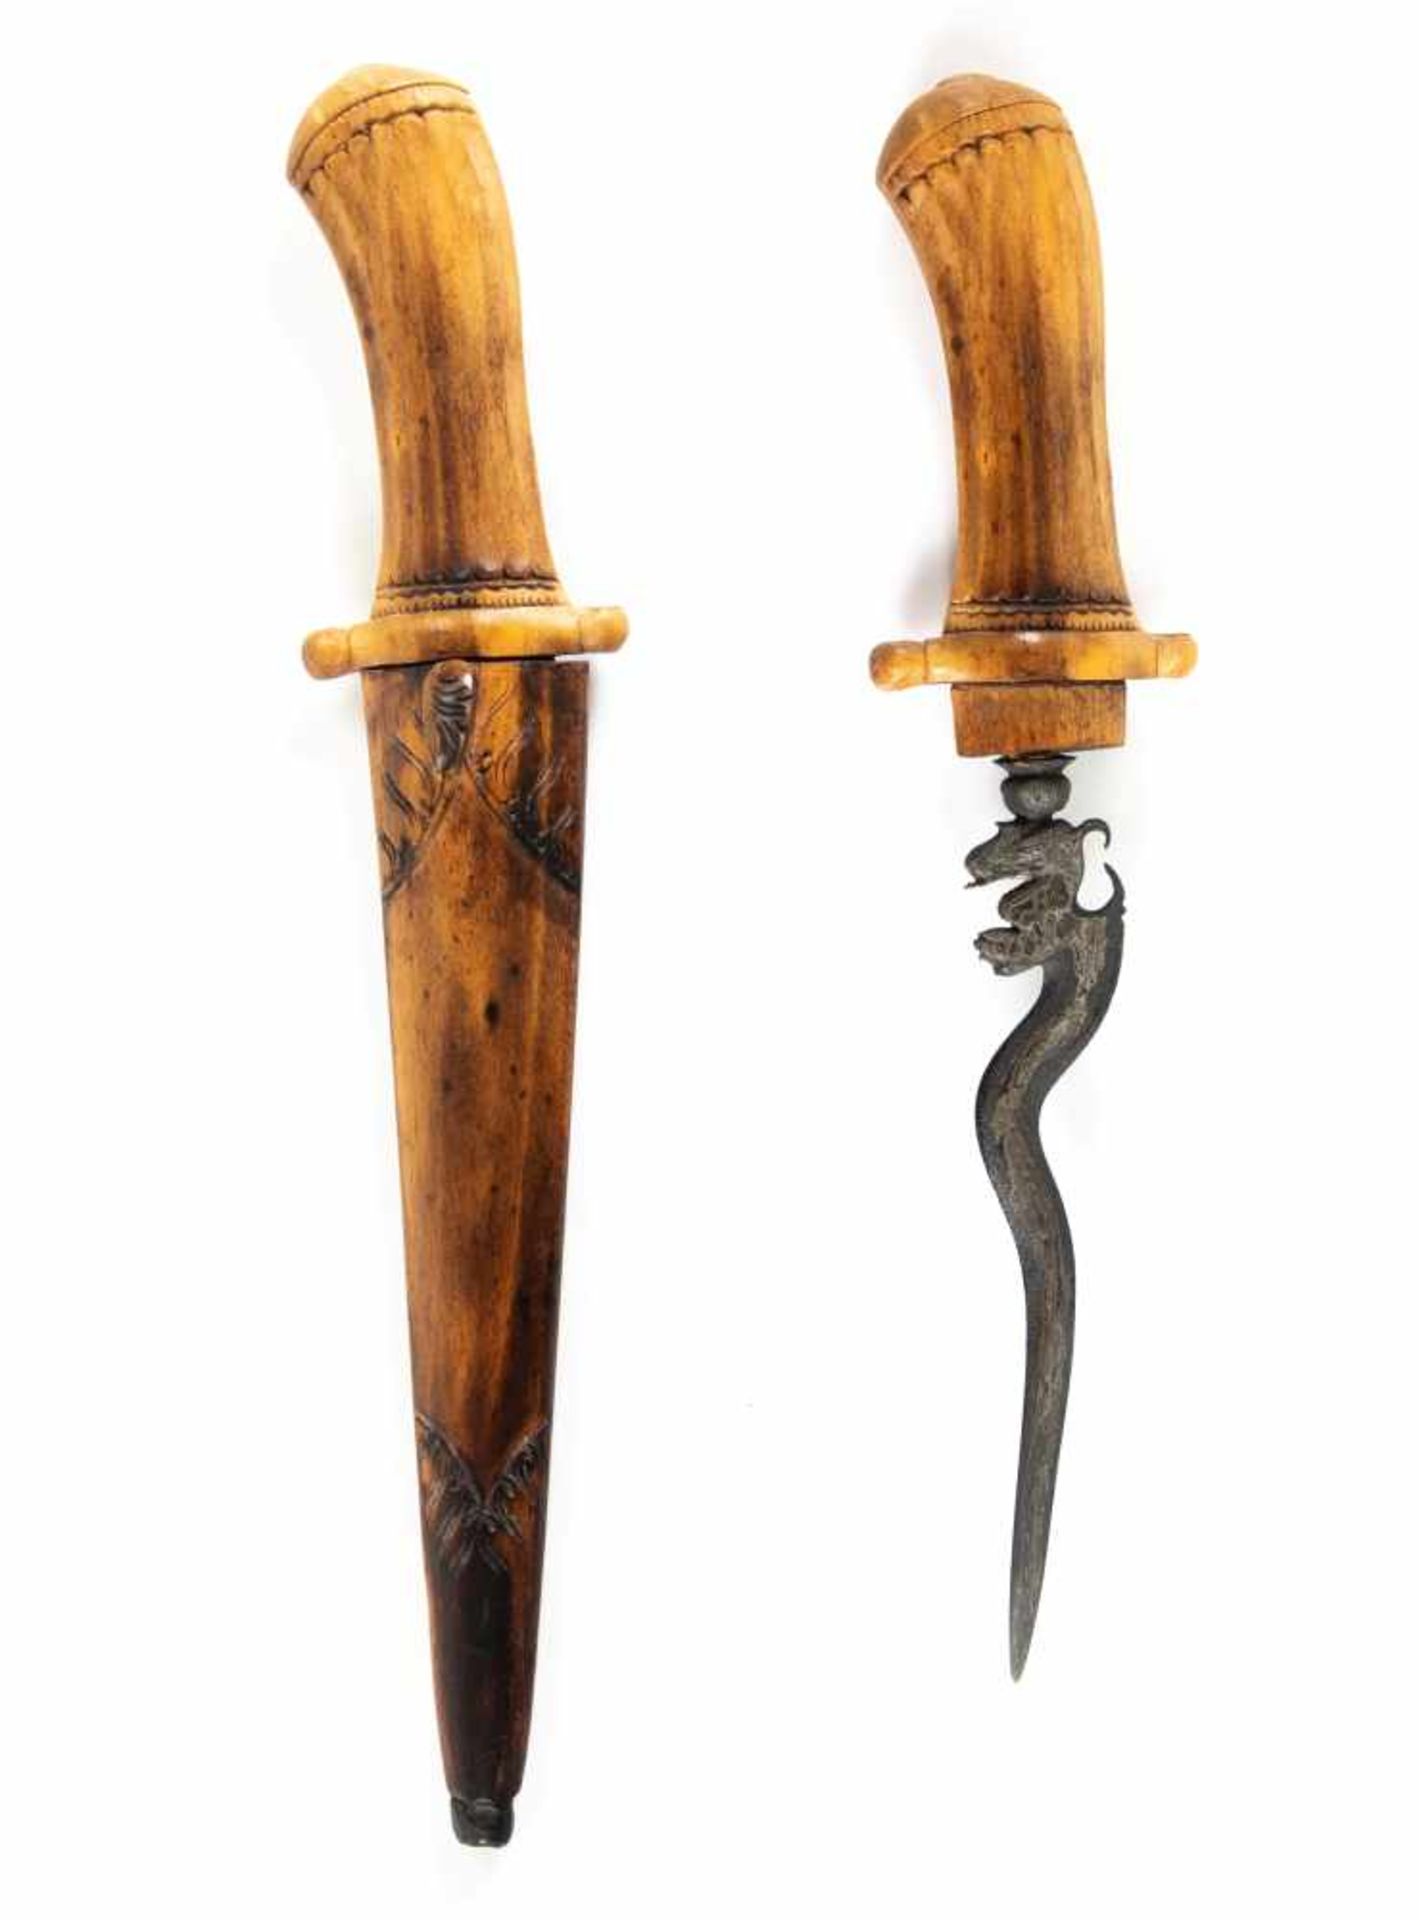 A rare 19th century Javanese Tombak or Lembing.A rare 19th century Javanese Tombak or Lembing.